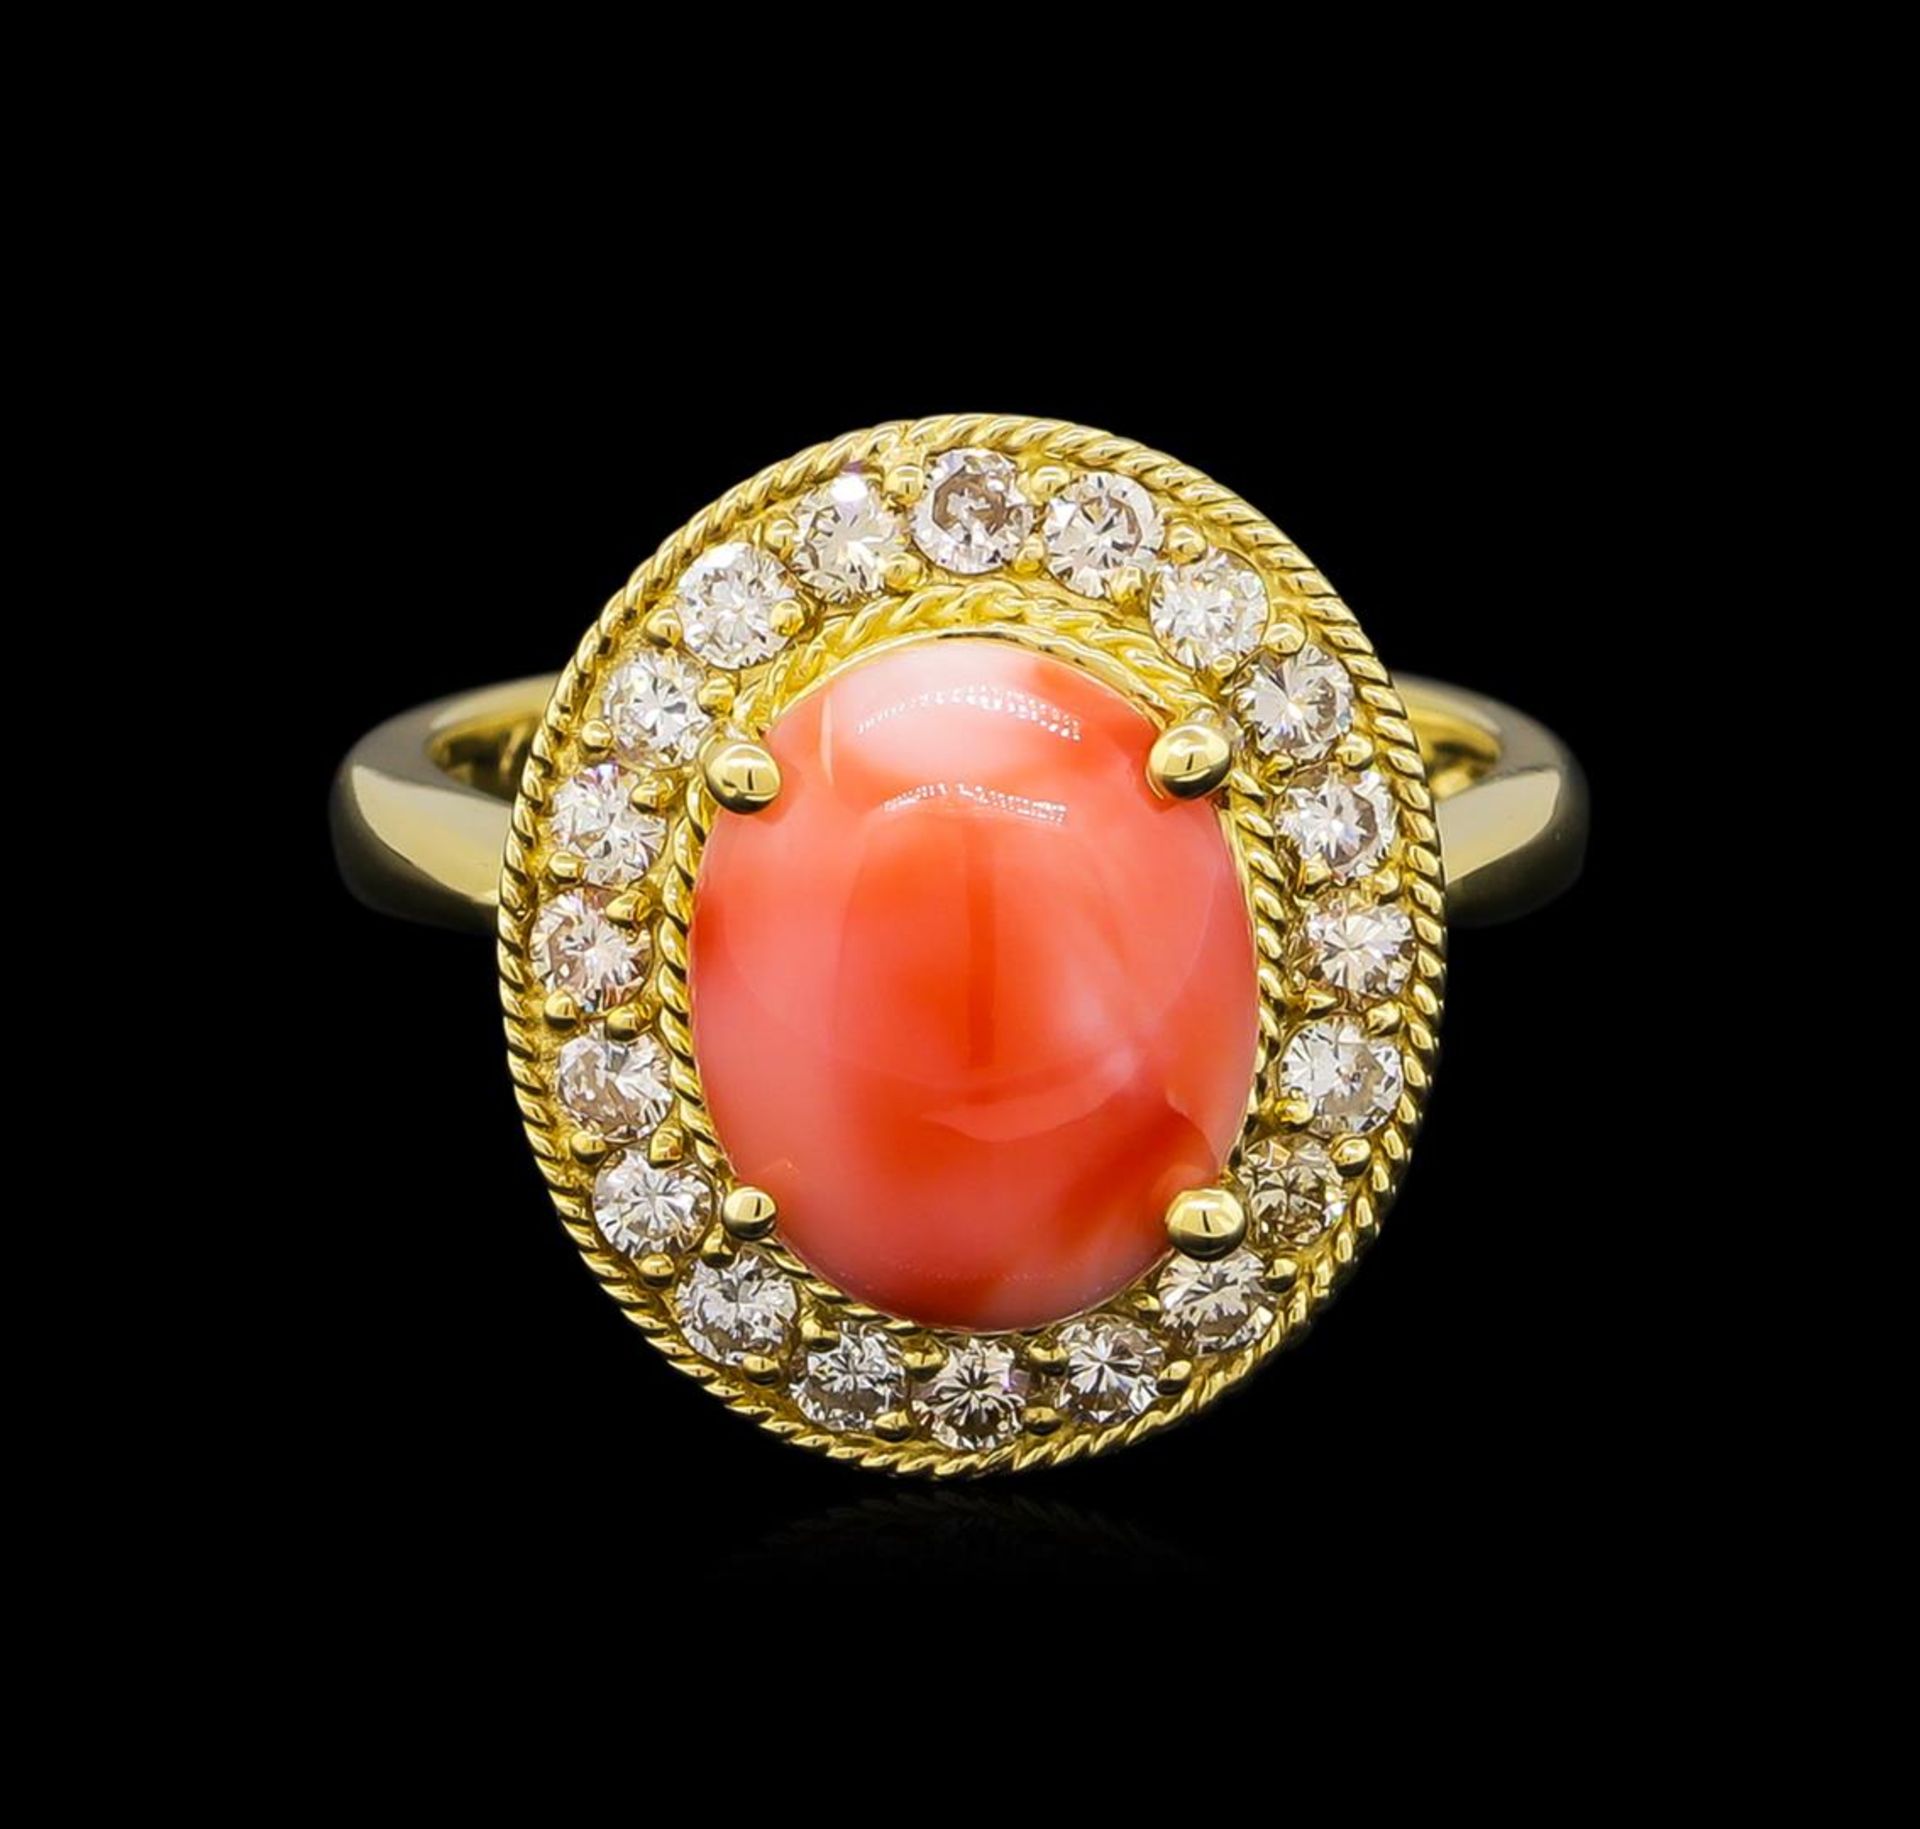 14KT Yellow Gold 3.16 ctw Coral and Diamond Ring - Image 2 of 5